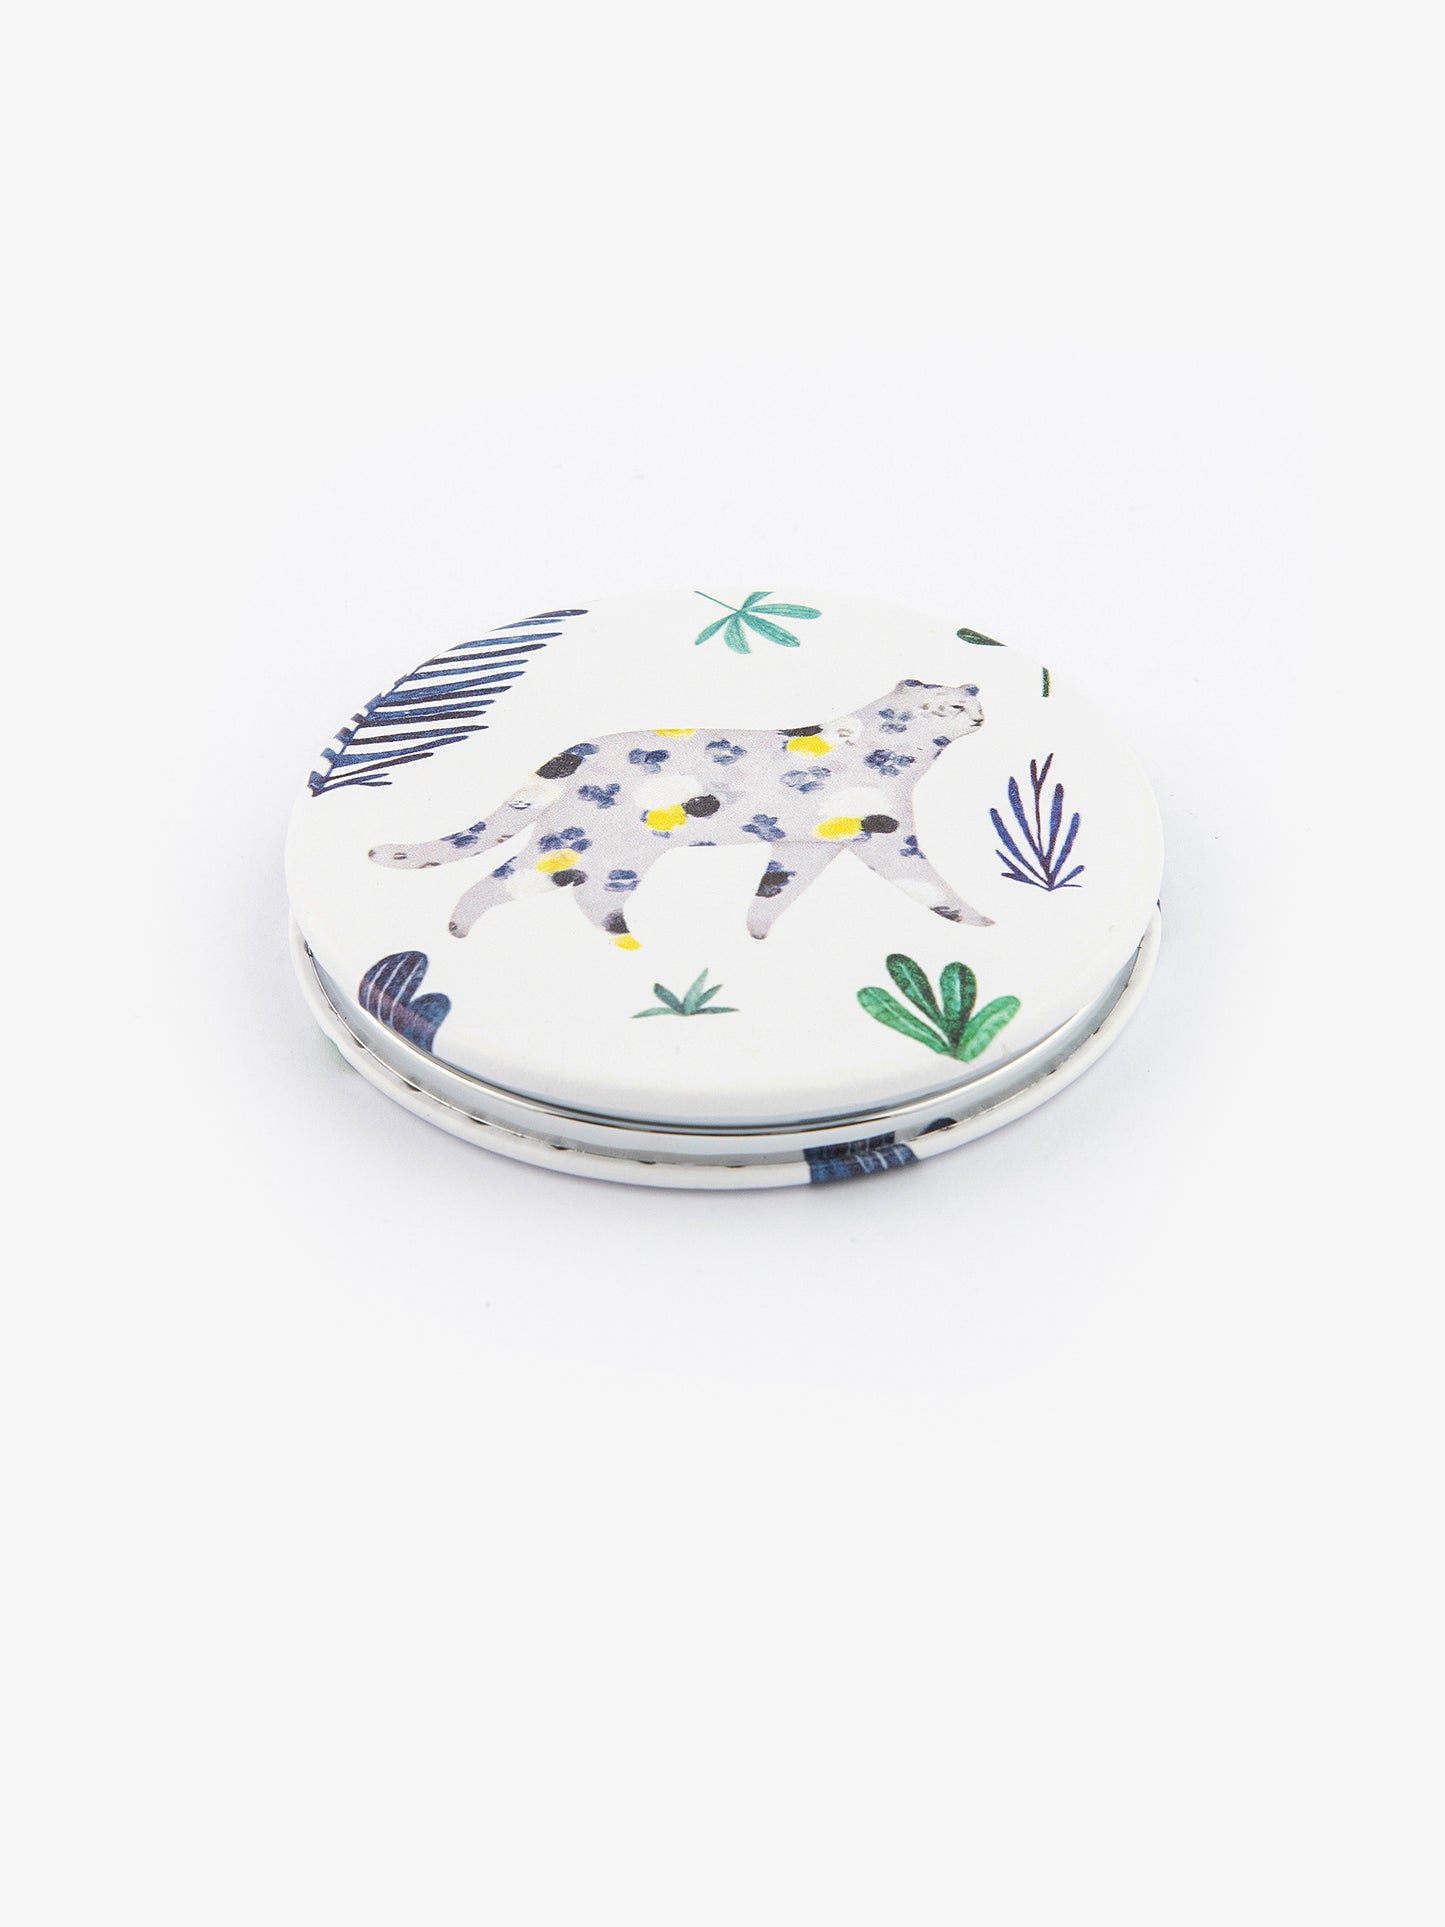 Abstract Compact Mirror